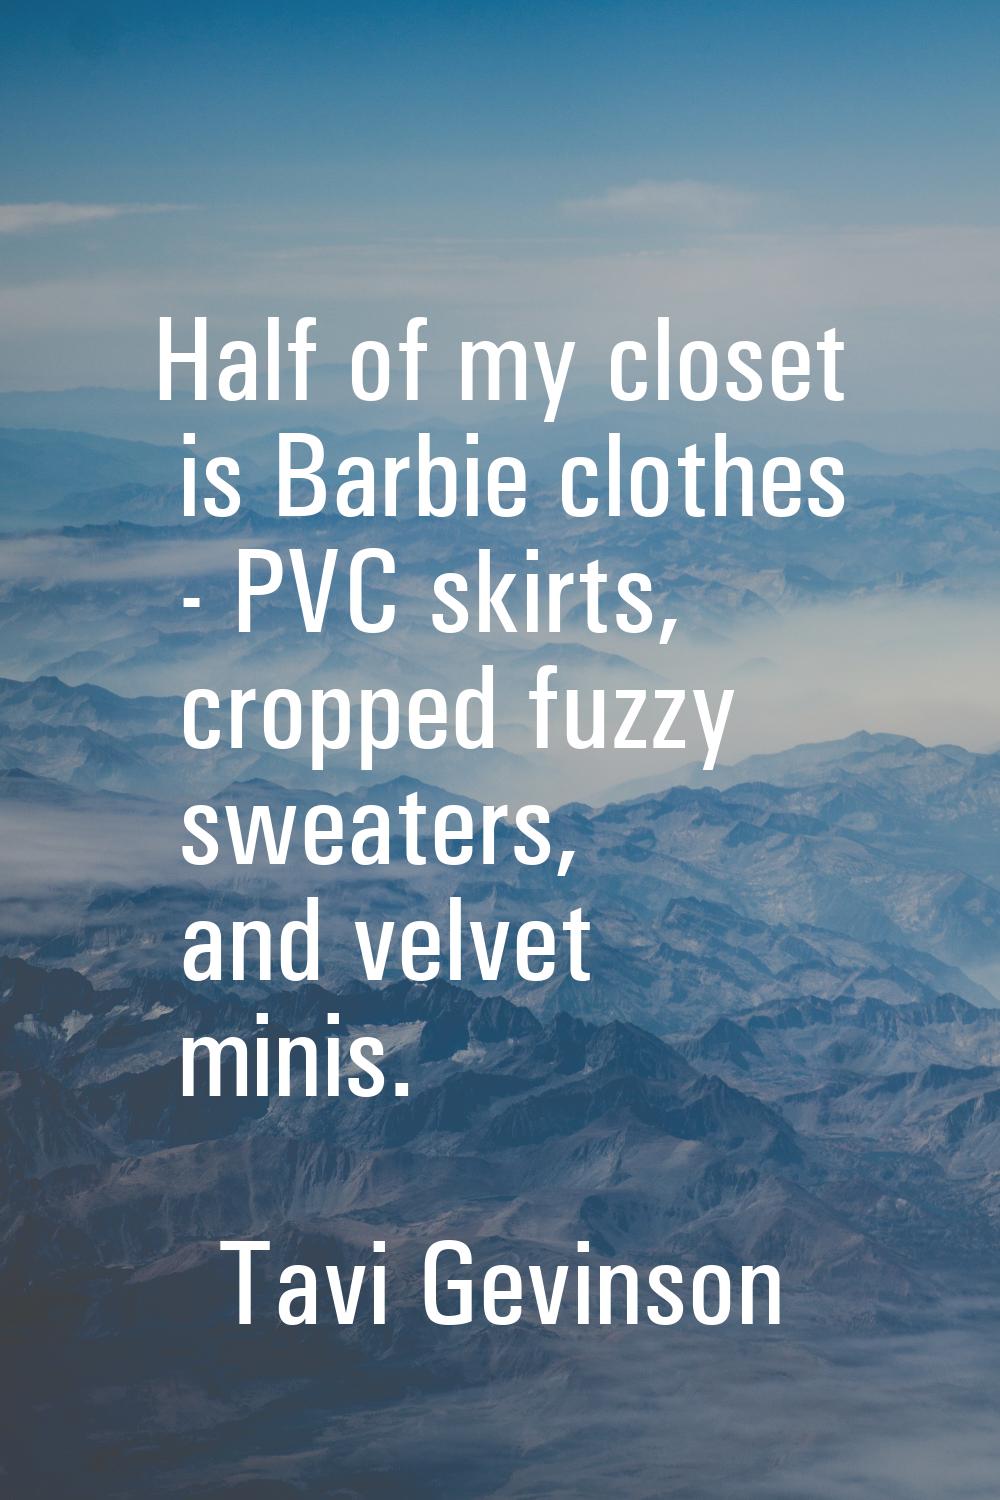 Half of my closet is Barbie clothes - PVC skirts, cropped fuzzy sweaters, and velvet minis.